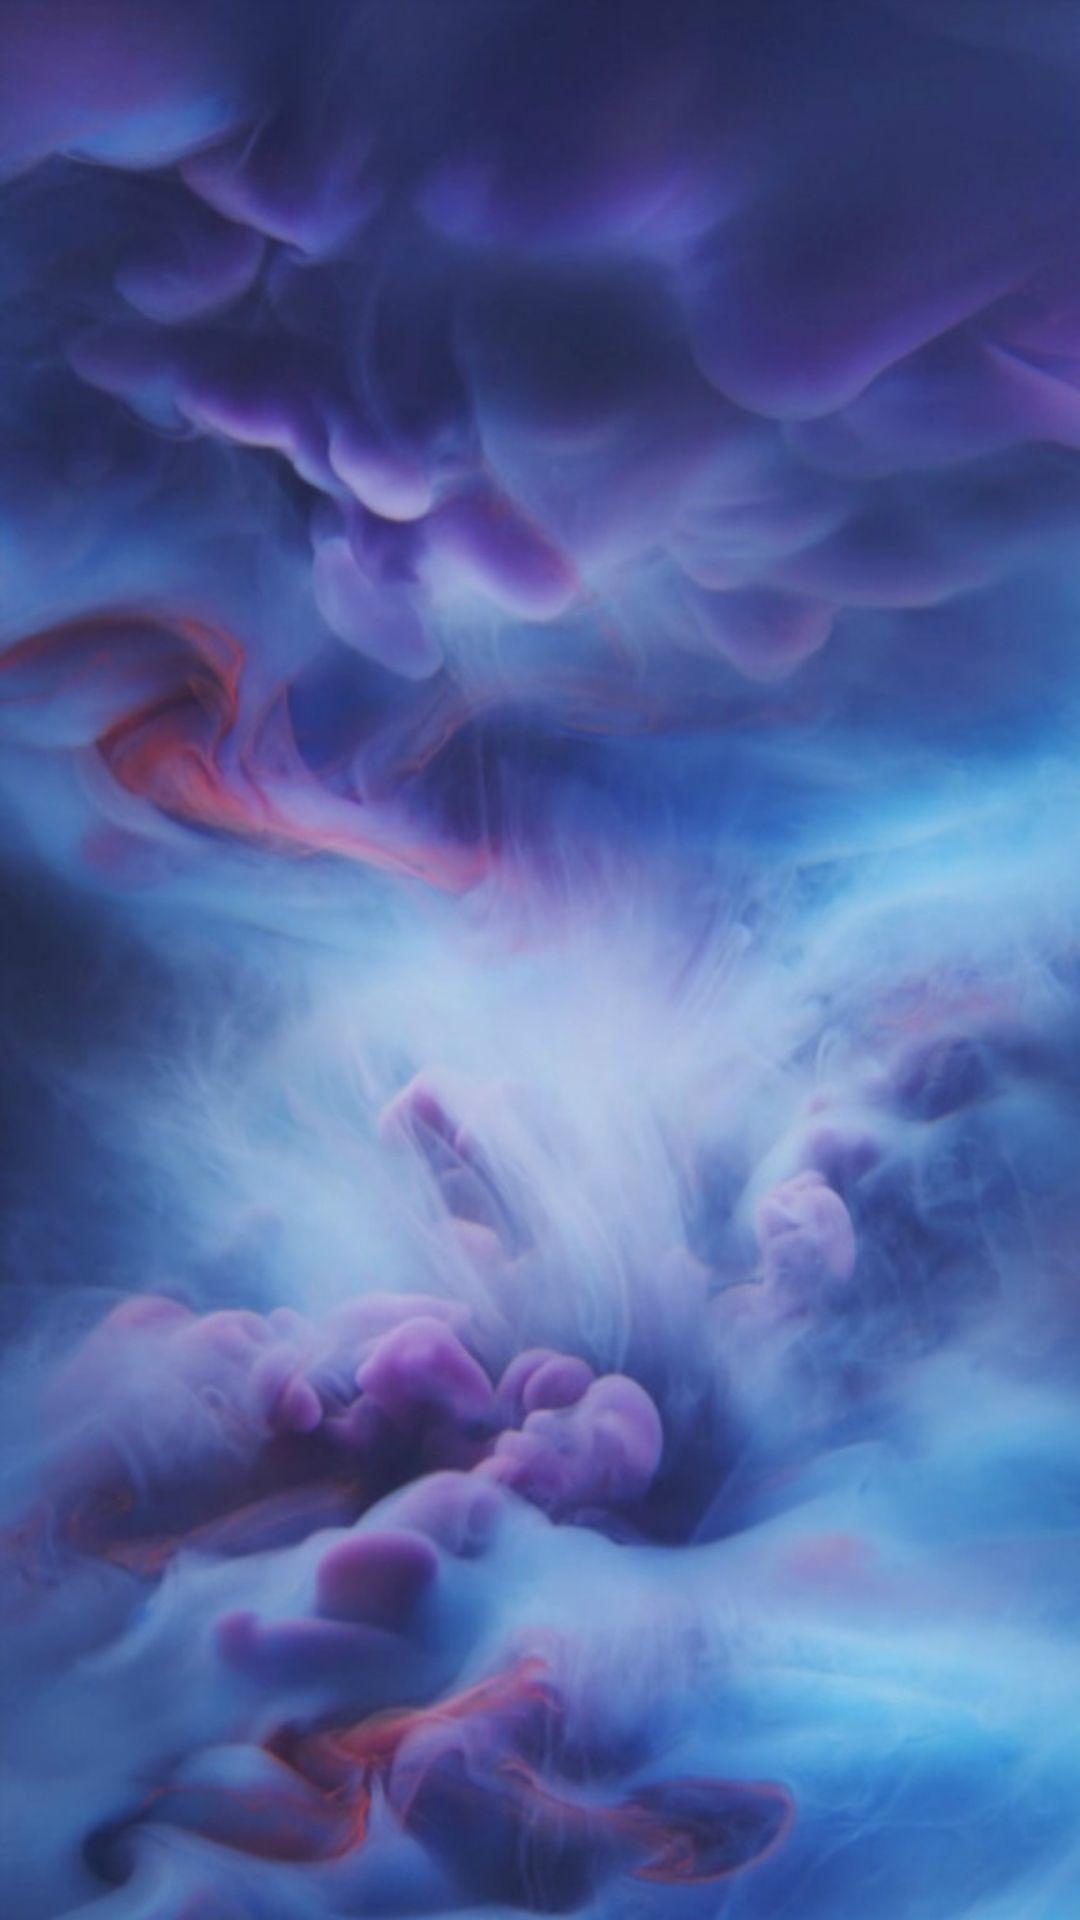 Abstract Thick Smoke Cloud Motion IPhone 6 Wallpaper Download. IPhone Wallpaper, IPad Wallpaper One S. IPhone 6s Wallpaper, IPhone 5s Wallpaper, Ios Wallpaper